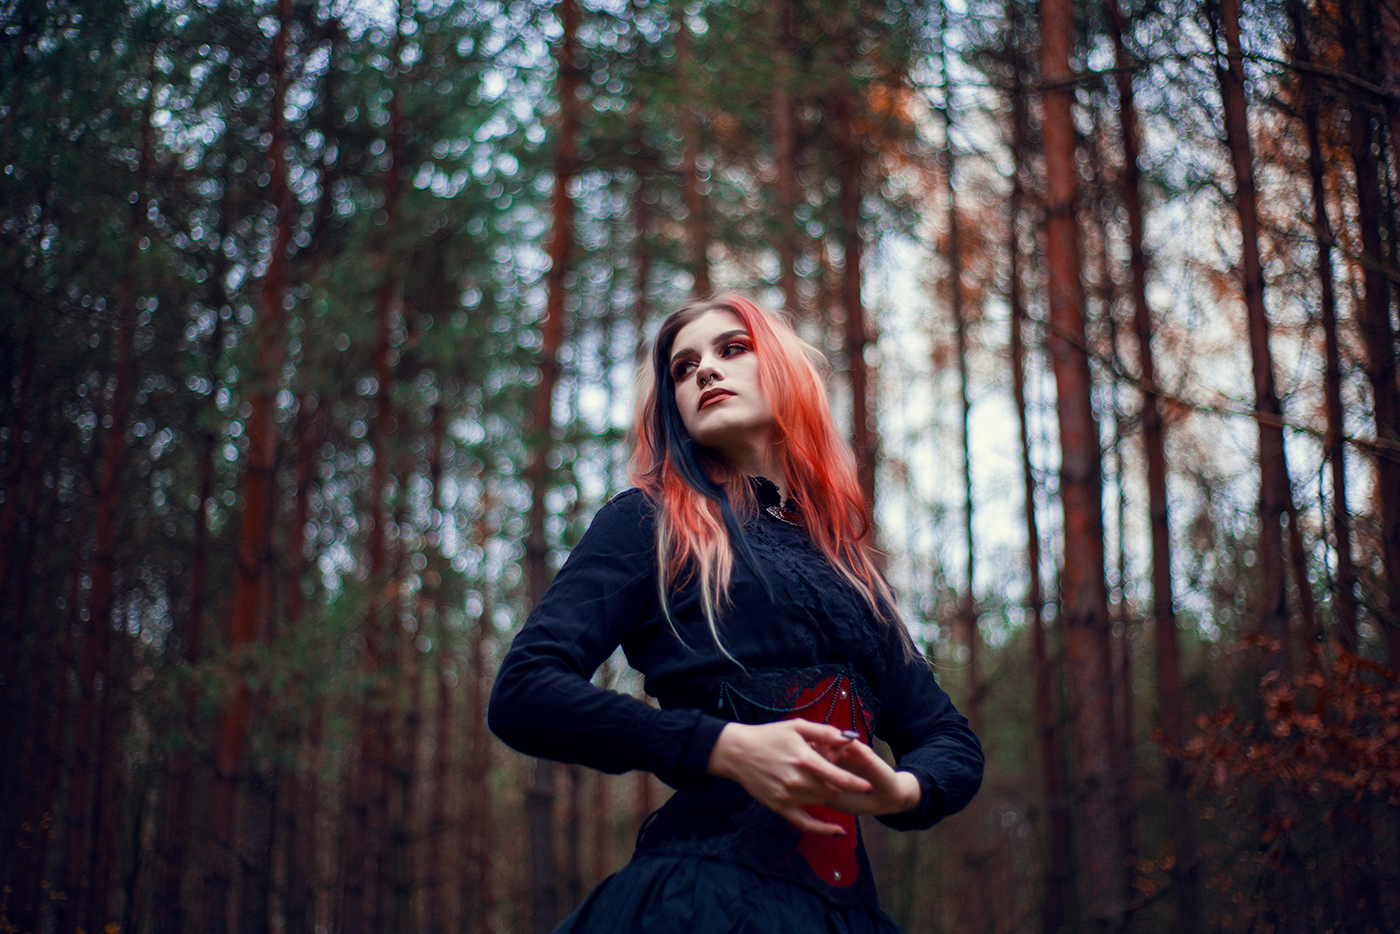 Women Model Redhead Dyed Hair Women Outdoors Trees Goths Forest 1400x934